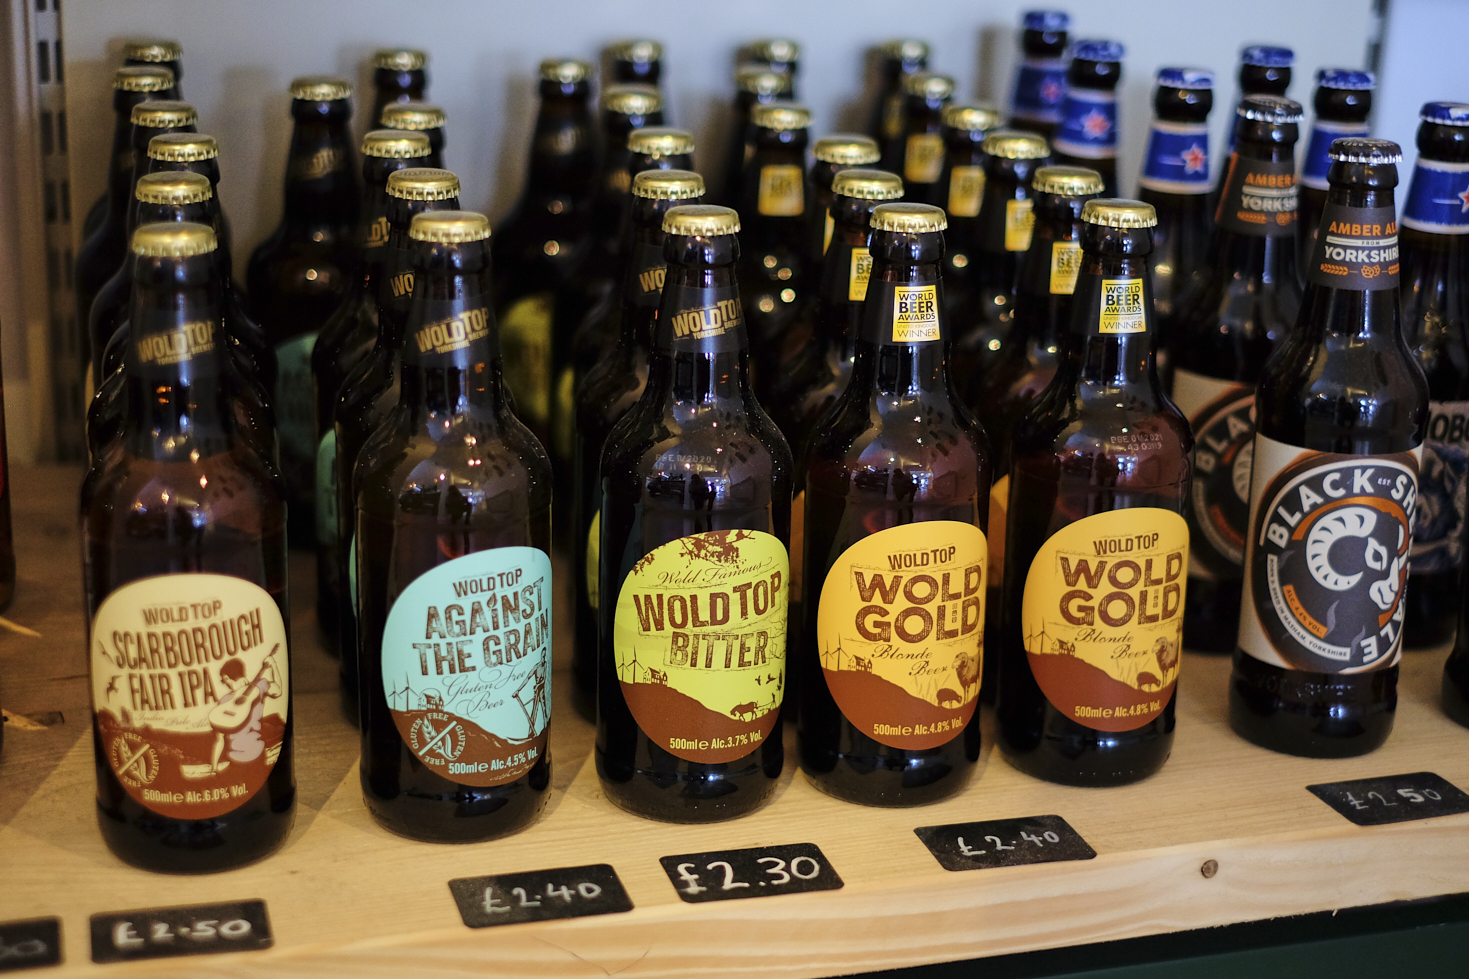 A wide selection of local beers.